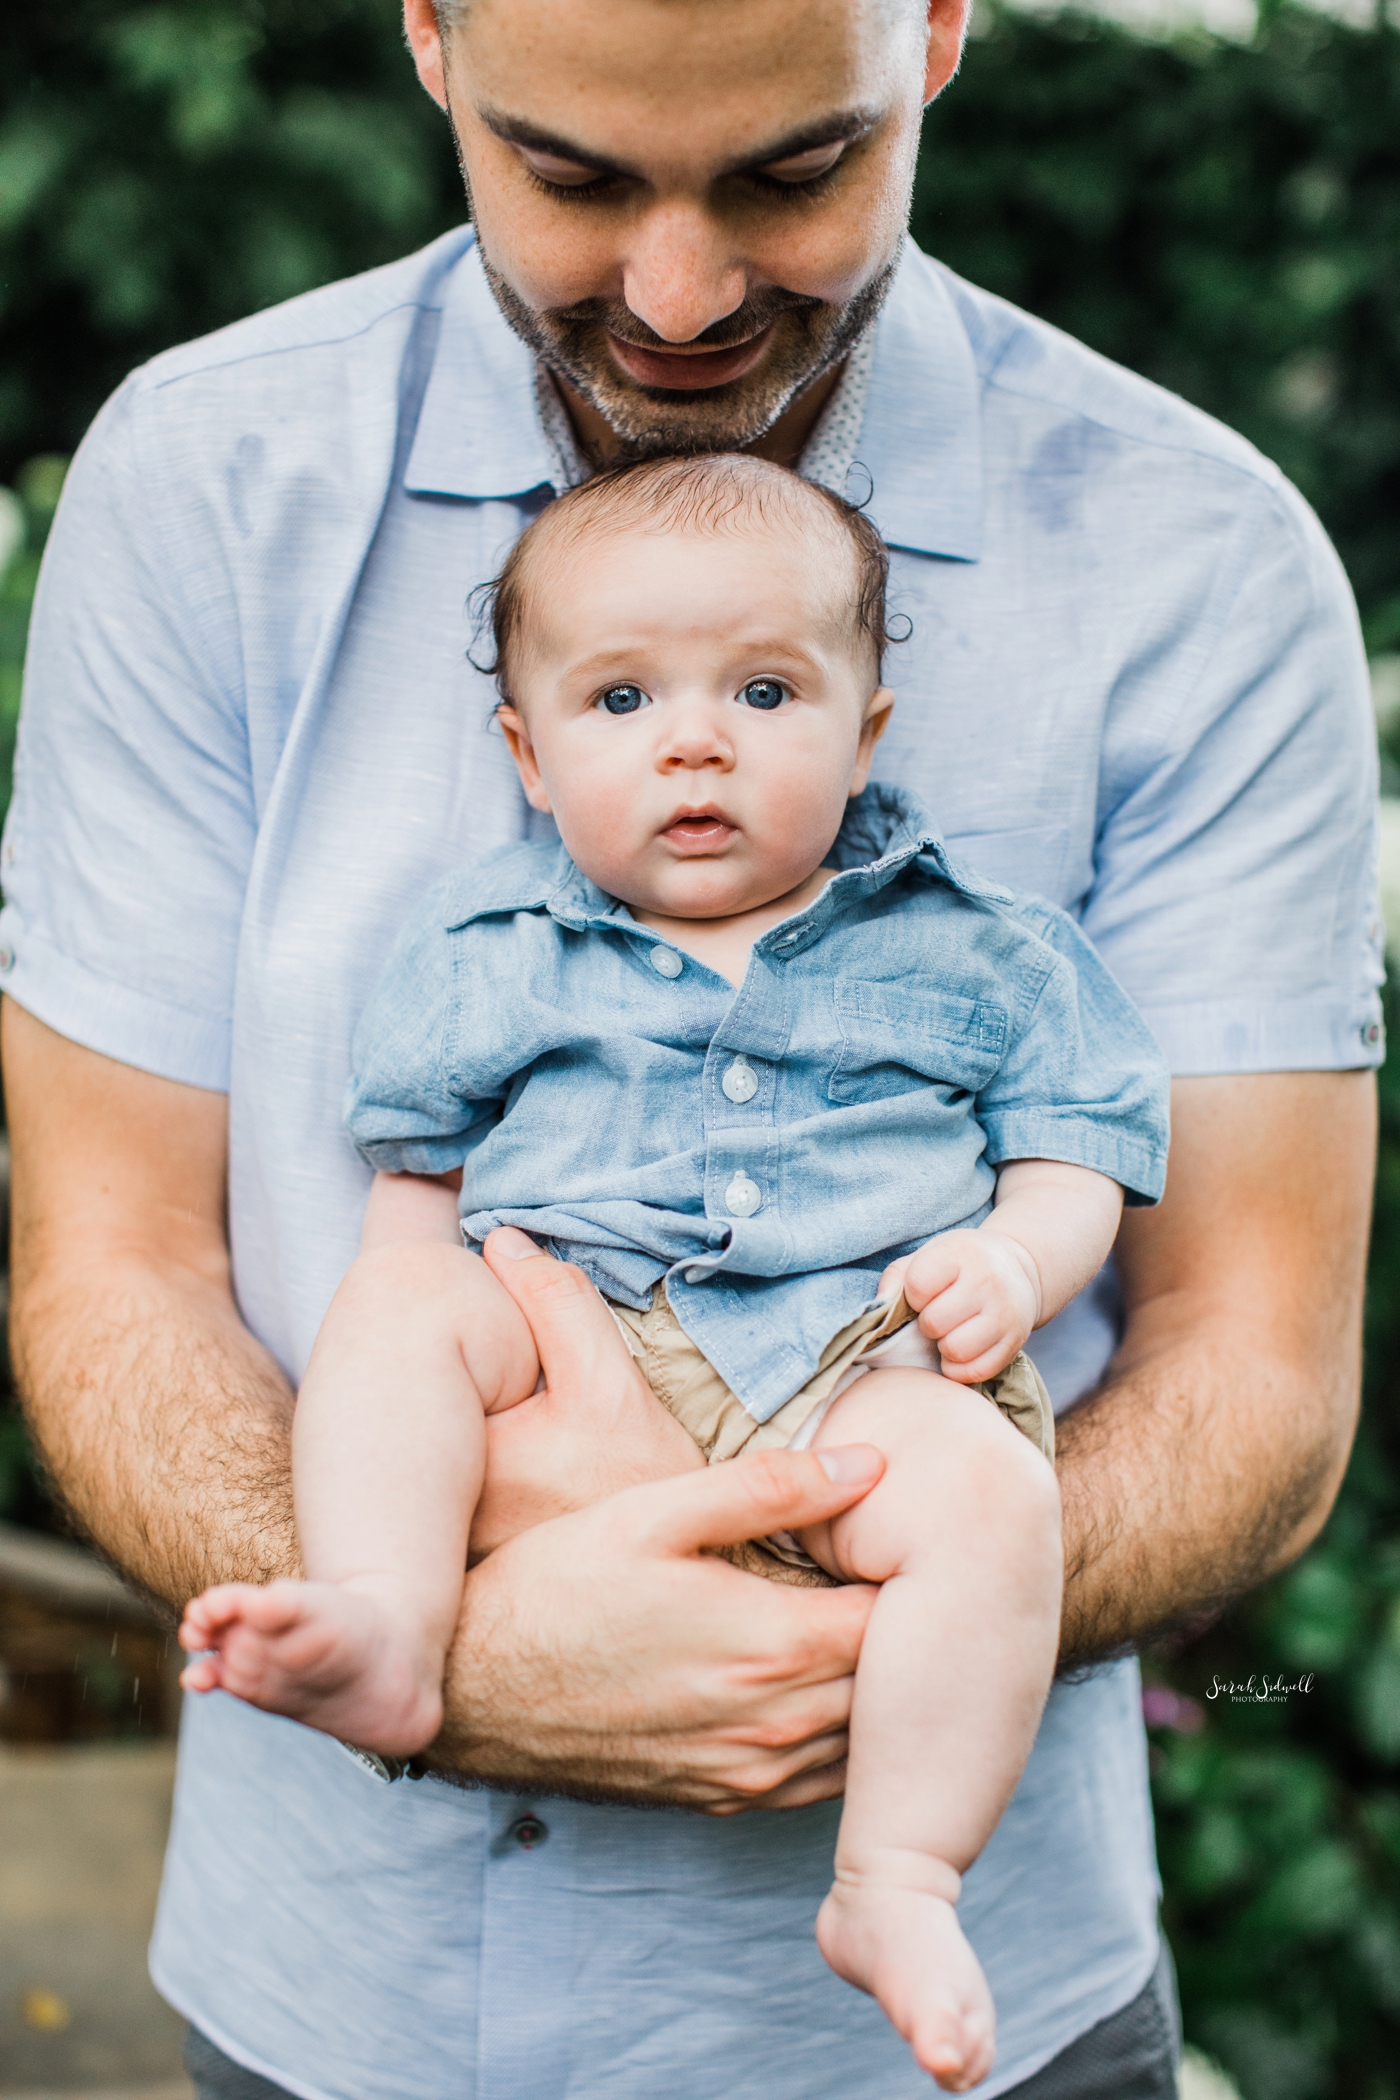 Extended Family Photo Session | The Vernichs